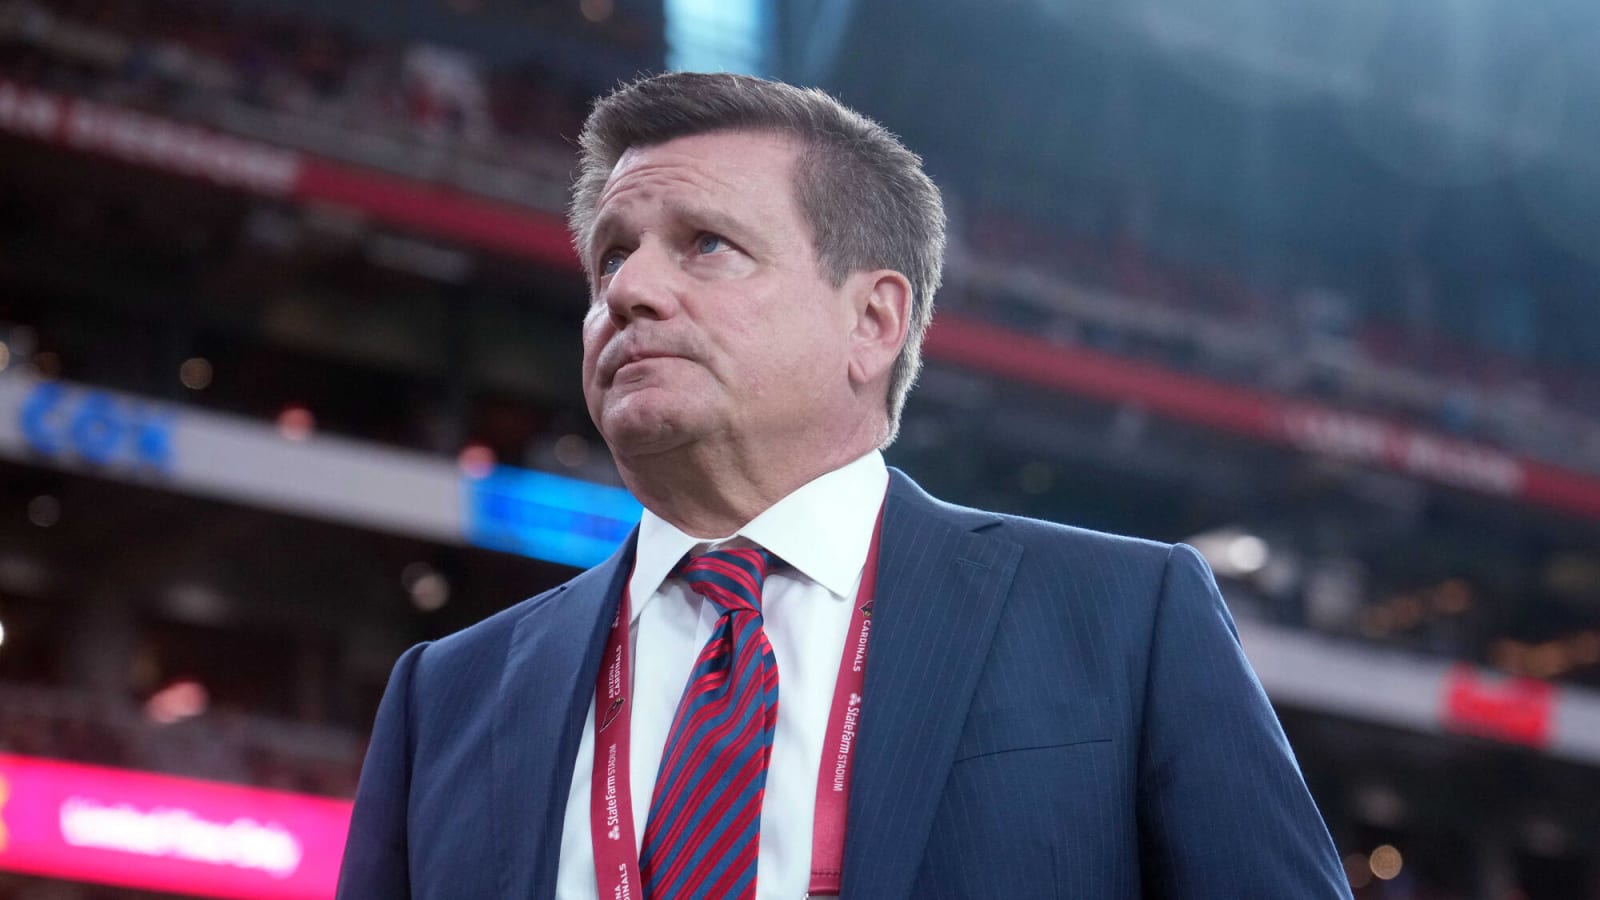  Arizona Cardinals Owner Michael Bidwill Under Fire by Fans for Enforcing Blackout; Keeping Epic Chiefs-Raiders Game Off Regional TV – Week 12